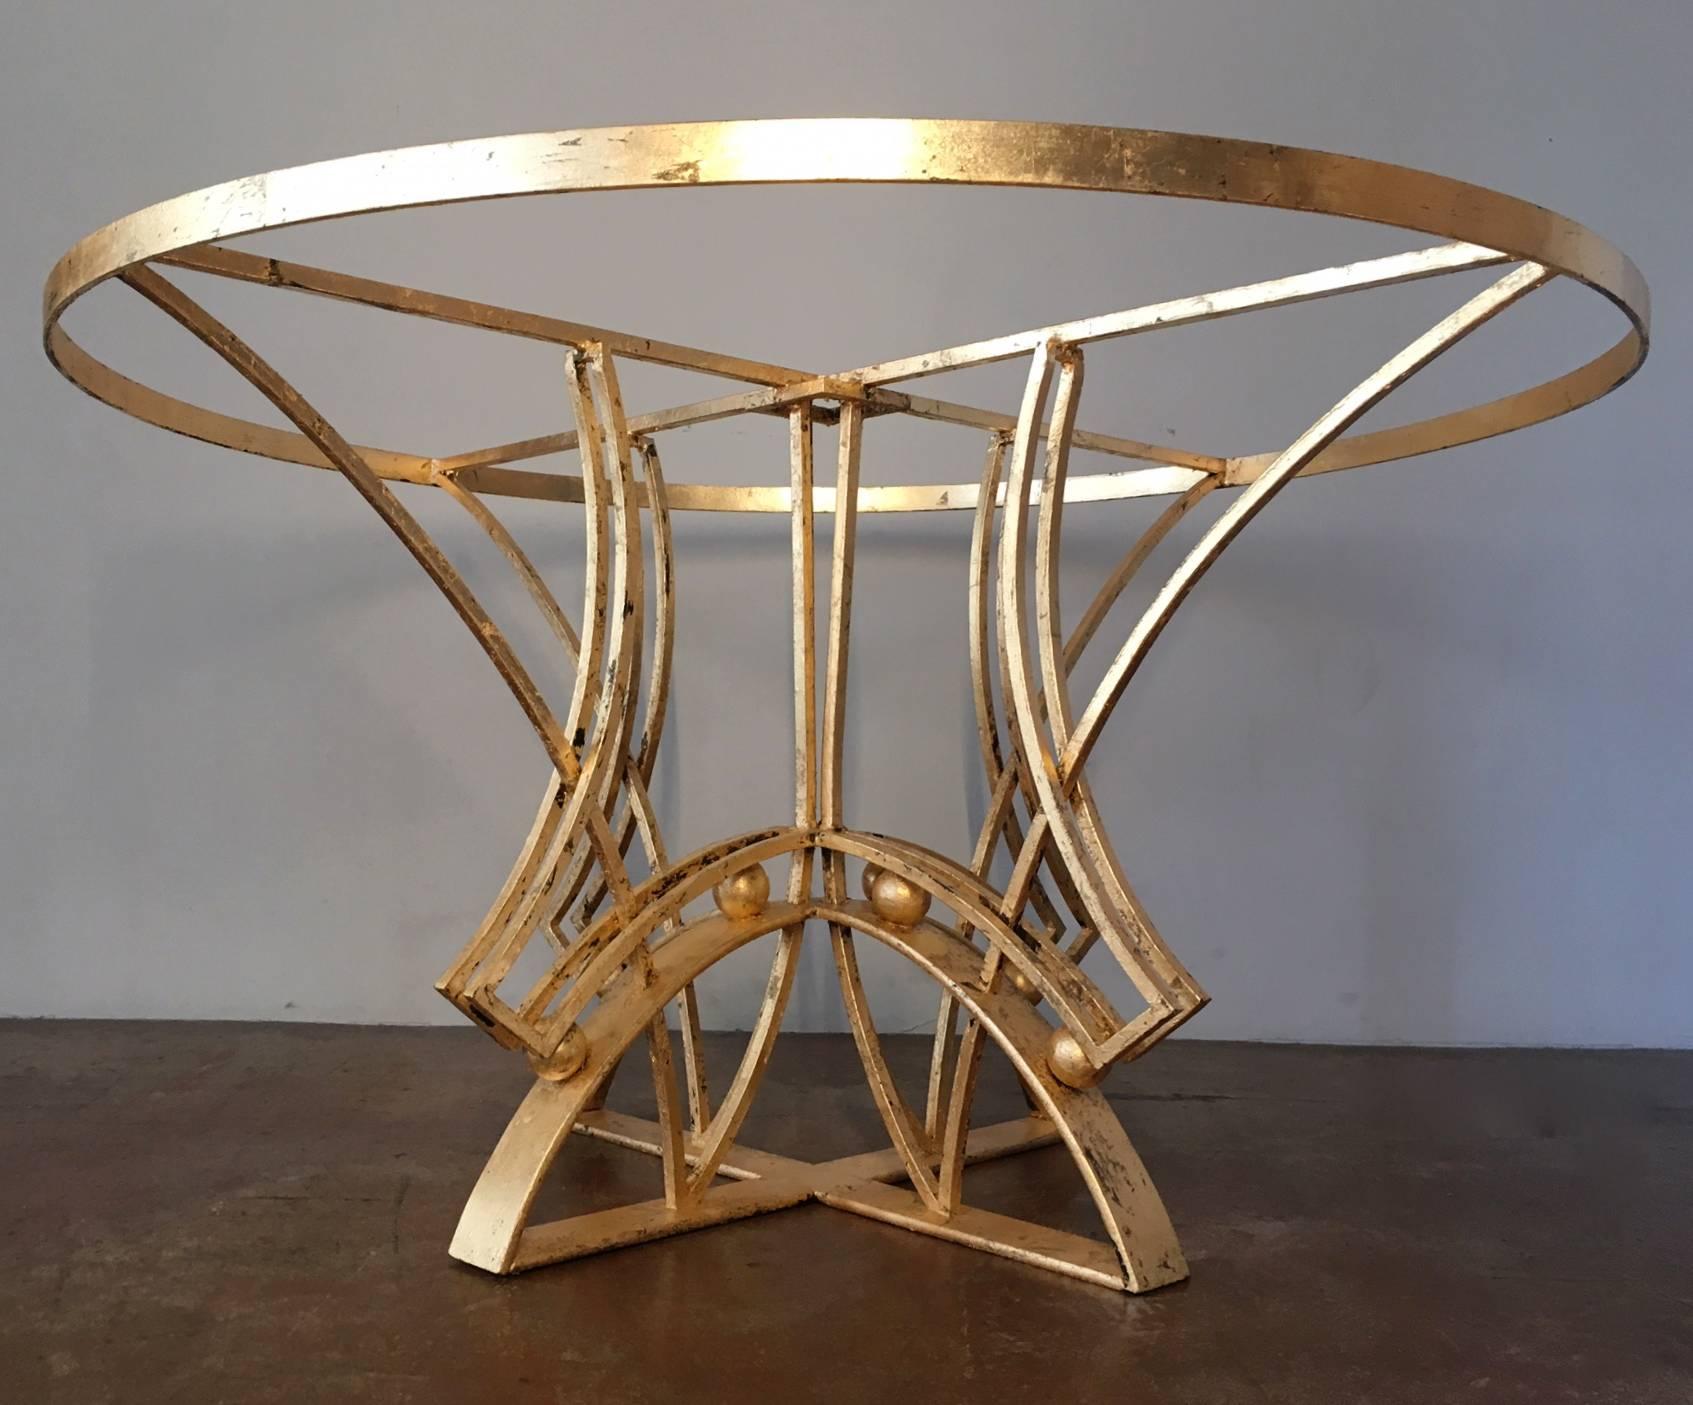 Stunning Arturo Pani Gilt Dining Table Base, Mexico City, 1950 In Good Condition For Sale In San Diego, CA